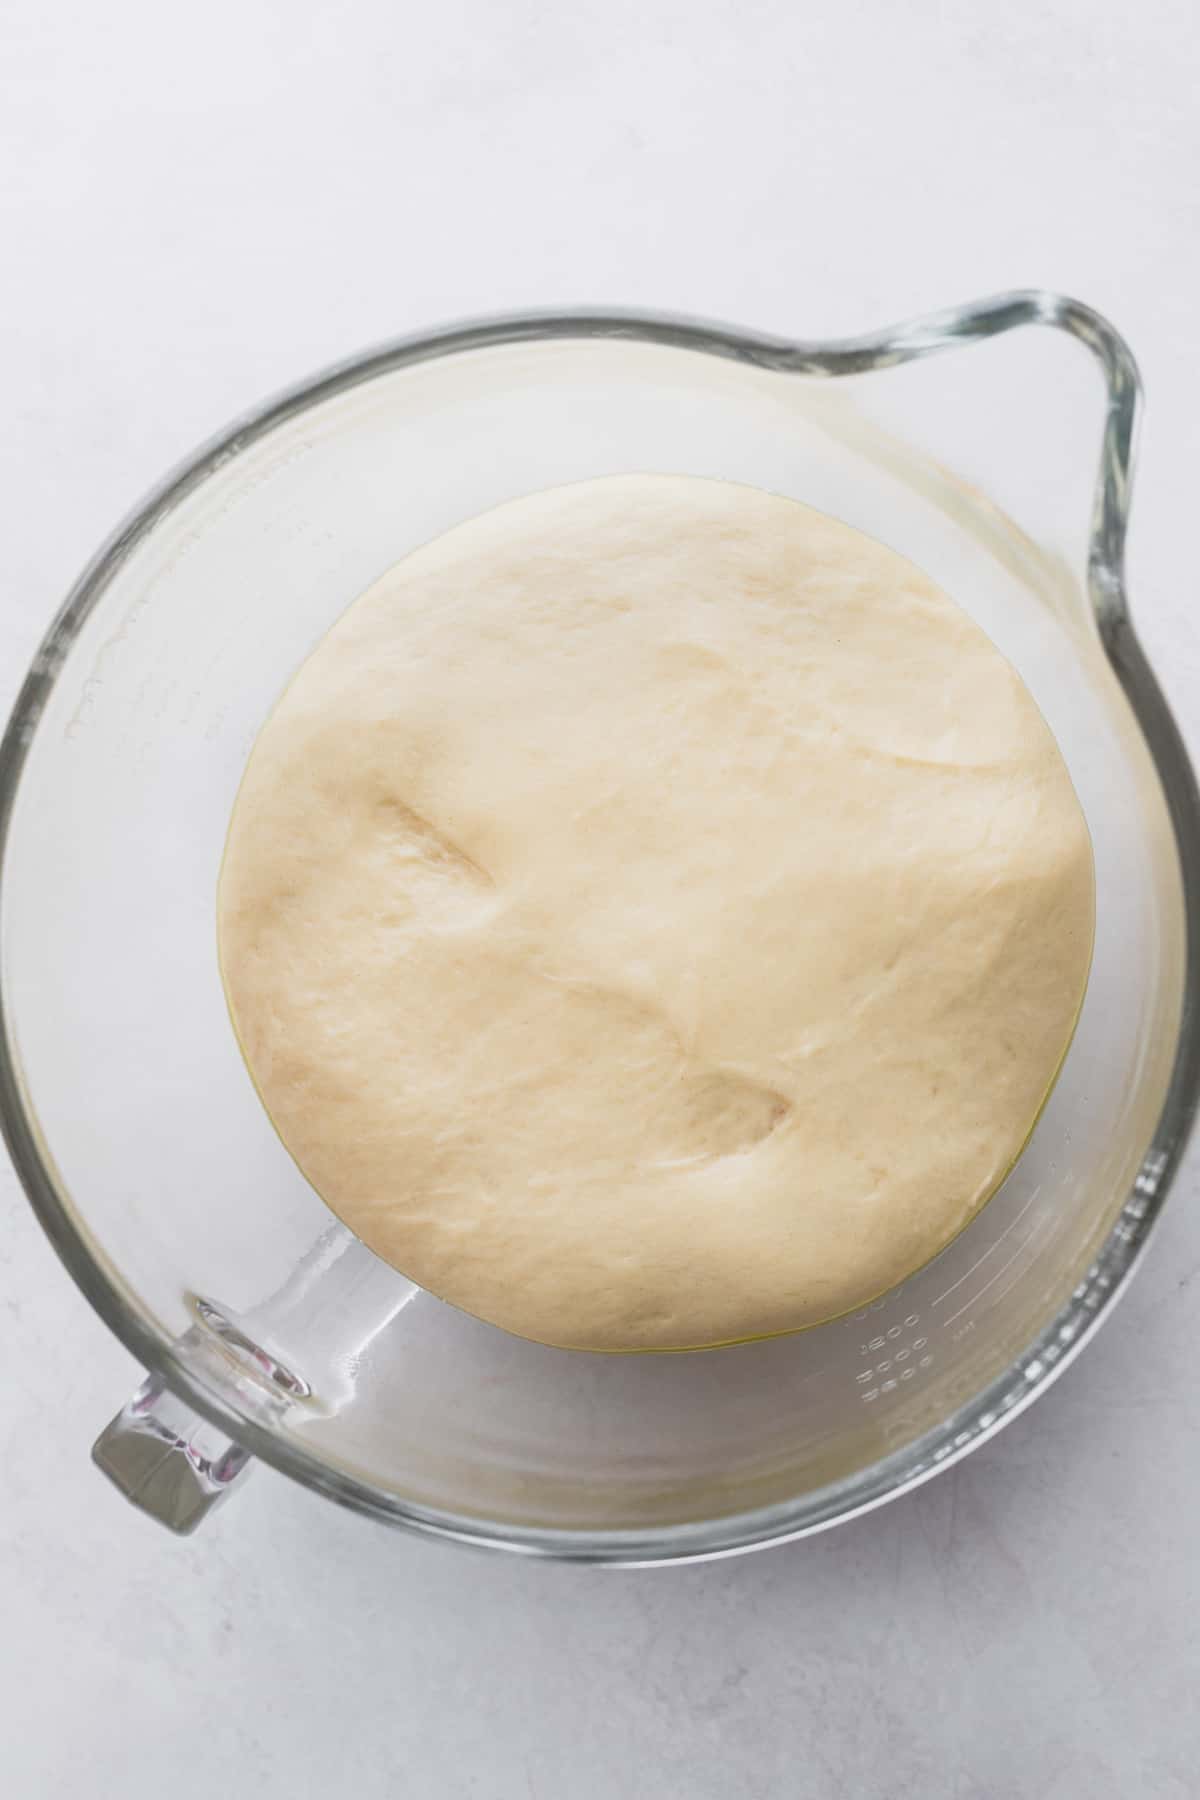 Dough after rising in a glass bowl.